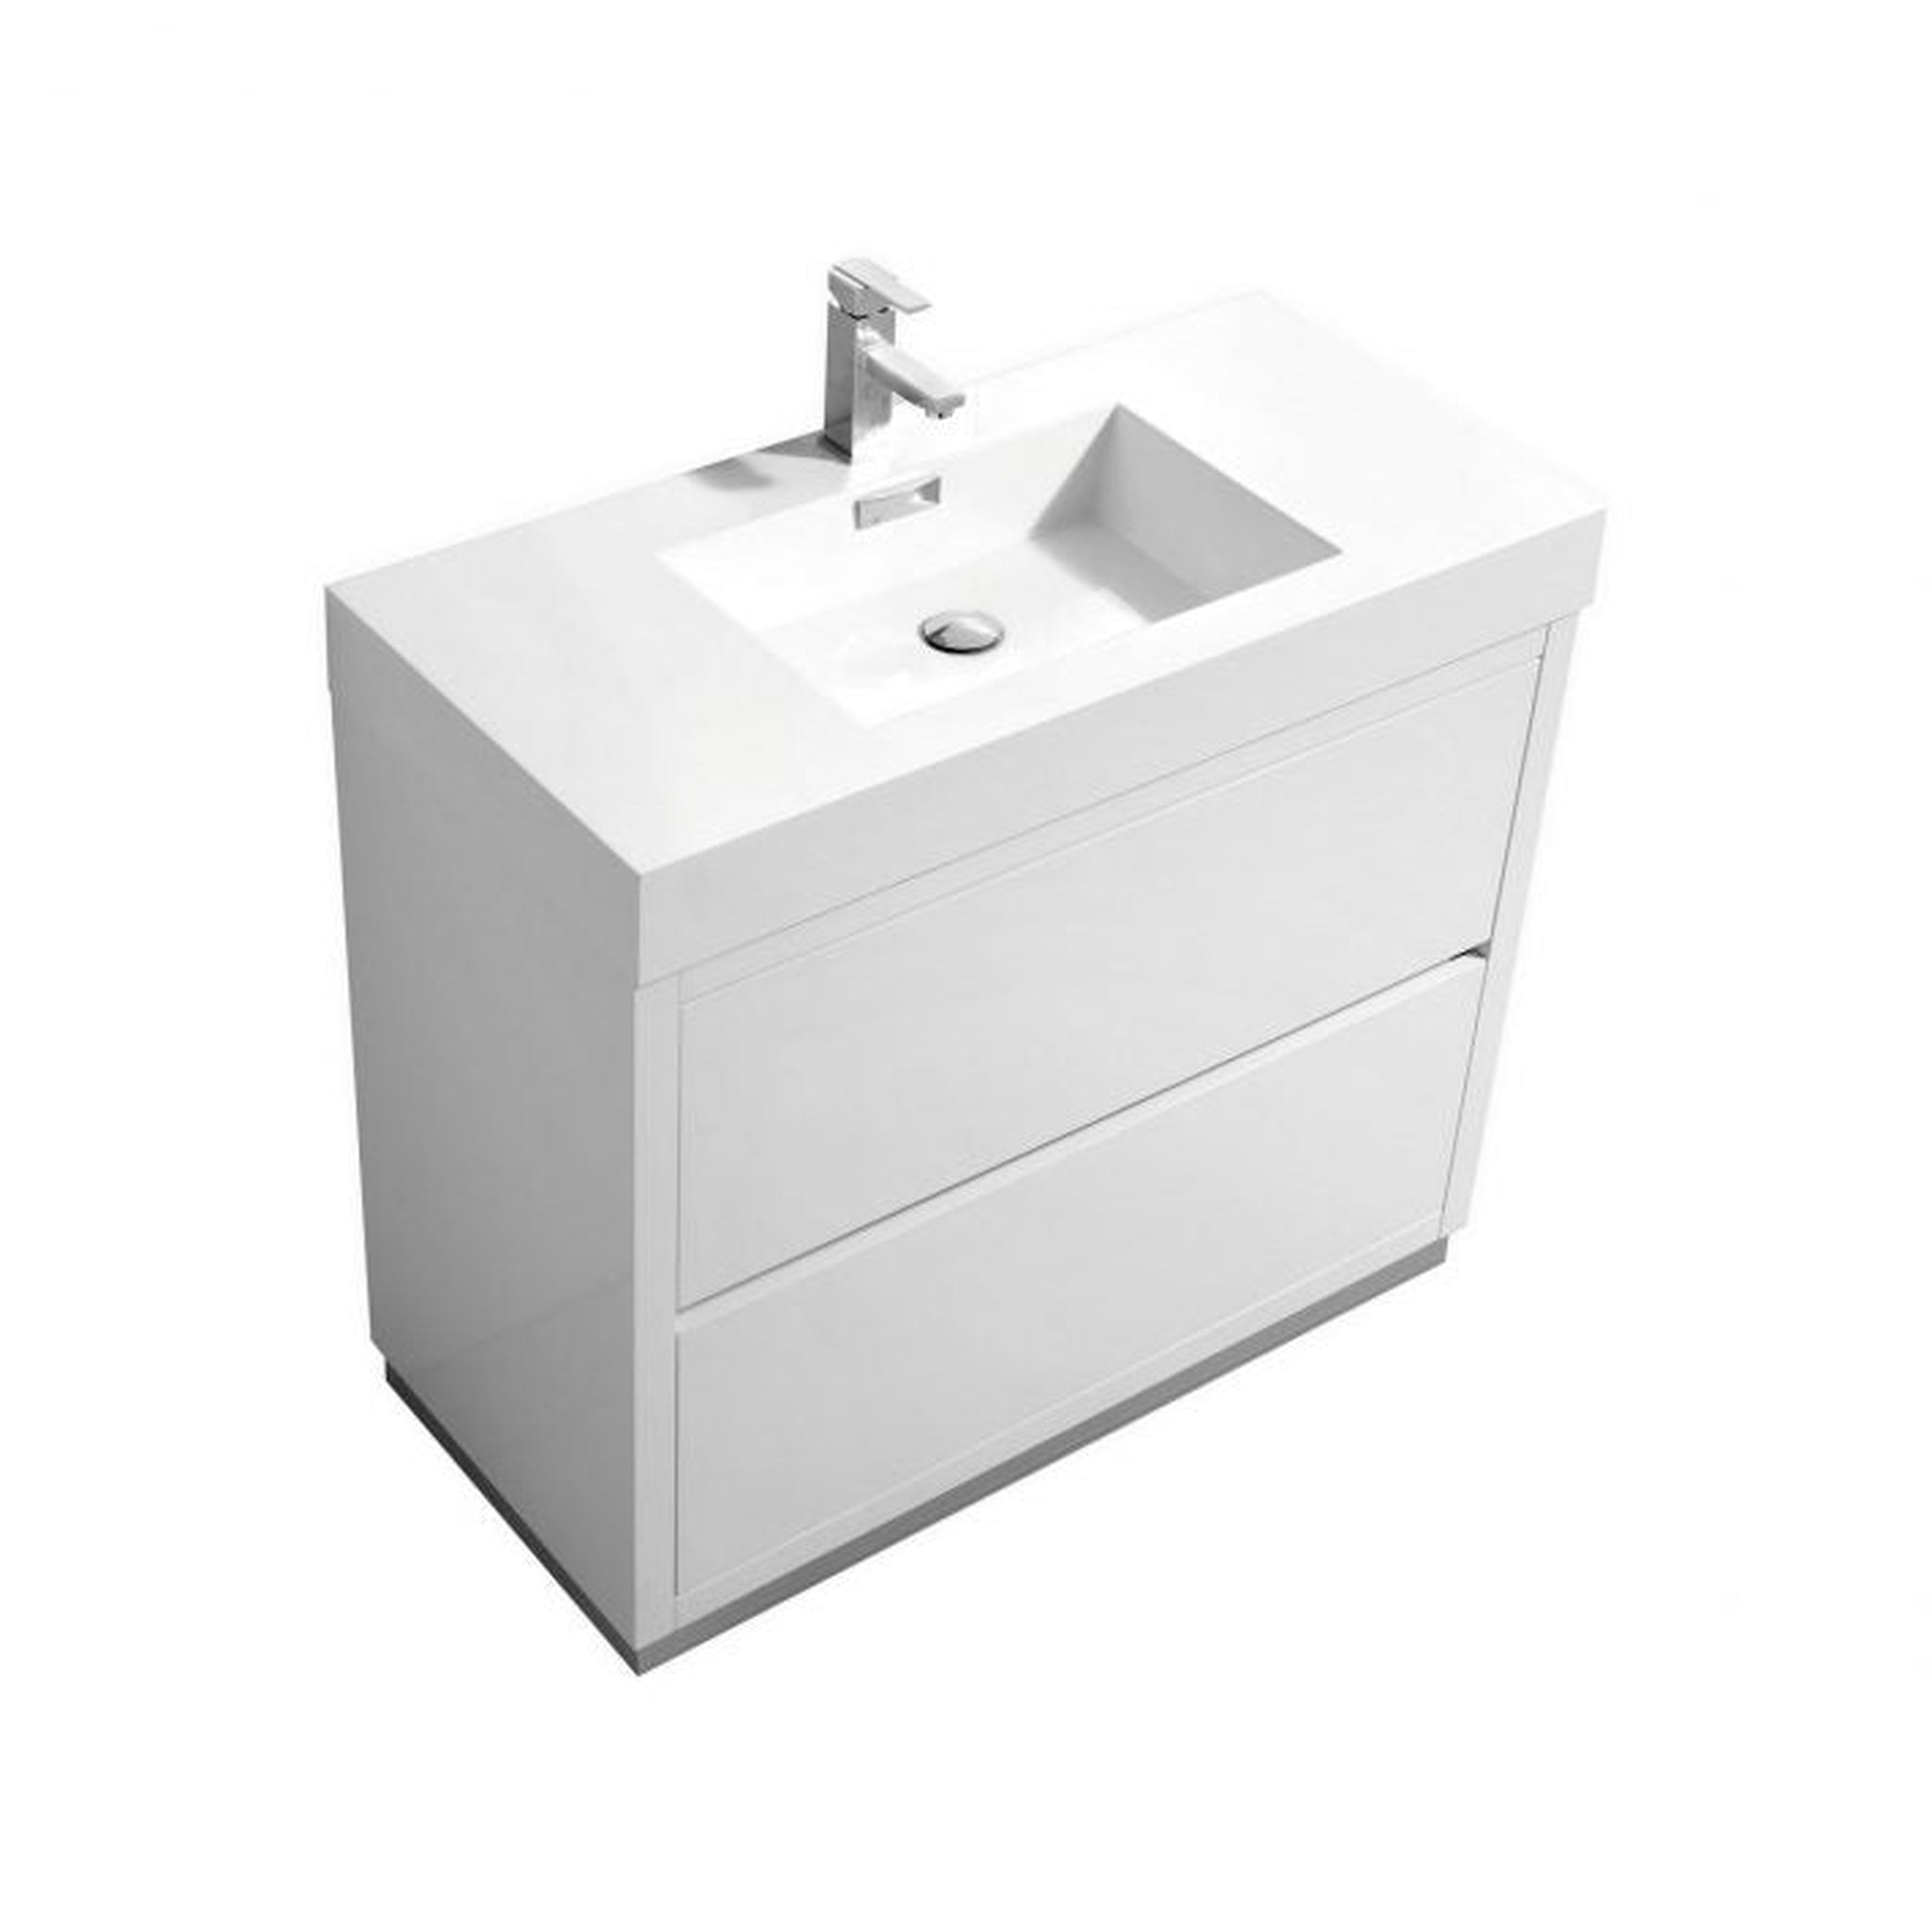 KubeBath, KubeBath Bliss 40" High Gloss White Freestanding Modern Bathroom Vanity With Single Integrated Acrylic Sink With Overflow and 36" White Framed Mirror With Shelf